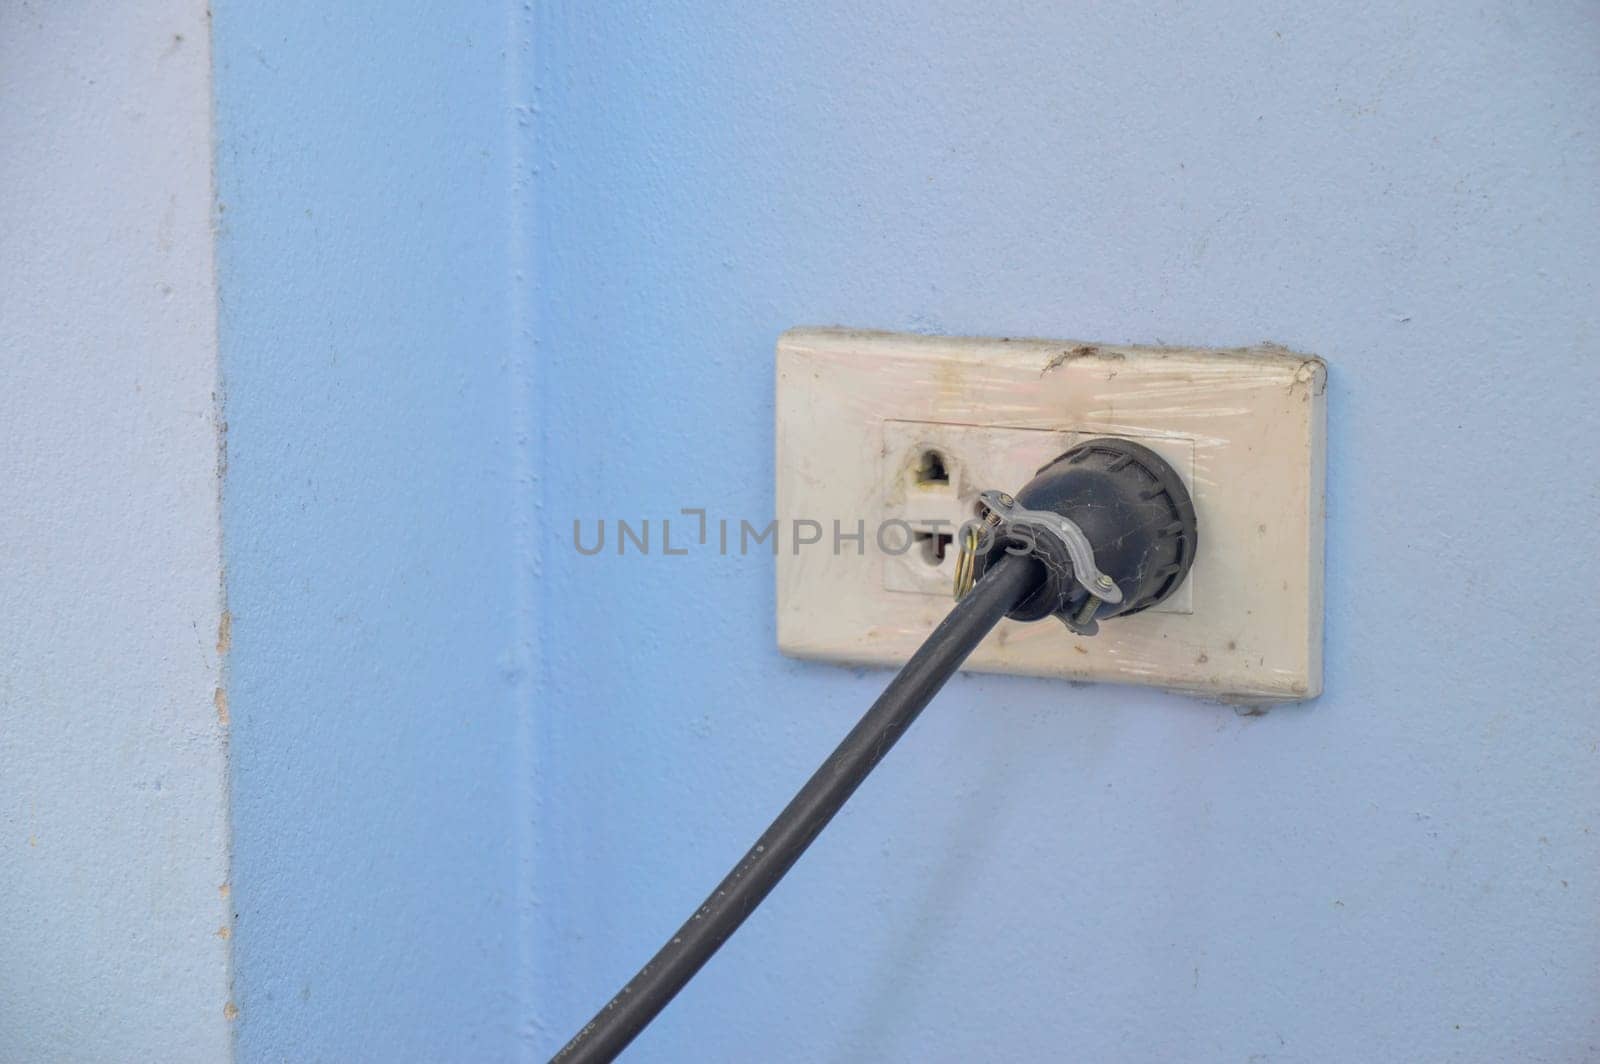 The power plug is plugged into the wall outlet.